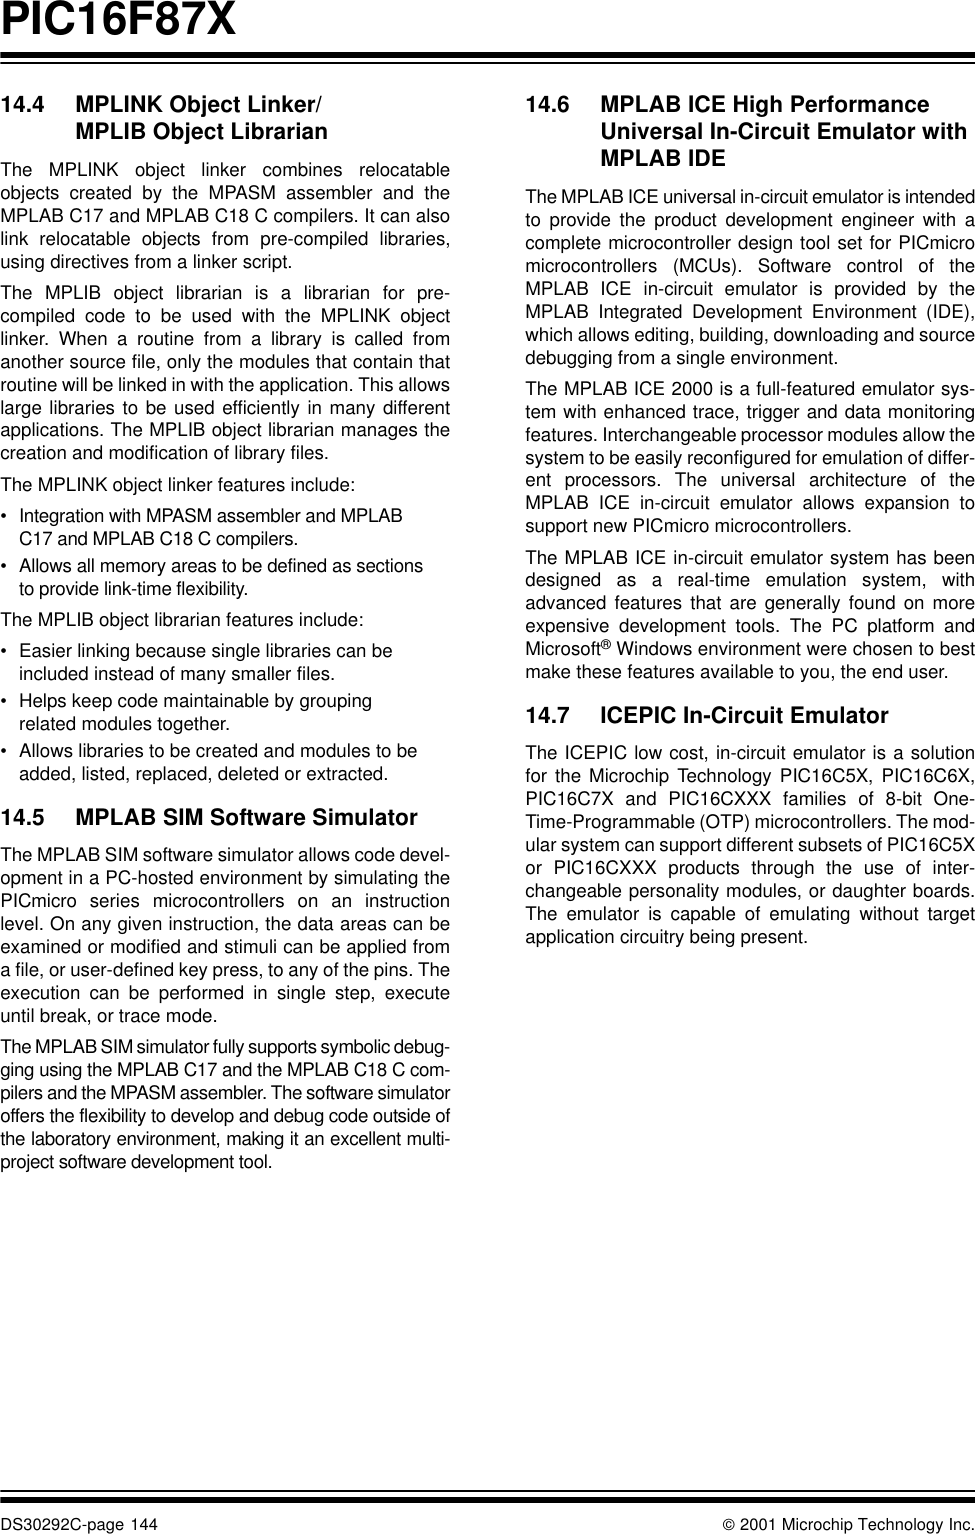 PIC16F87XDS30292C-page 144  2001 Microchip Technology Inc.14.4 MPLINK Object Linker/MPLIB Object LibrarianThe MPLINK object linker combines relocatableobjects created by the MPASM assembler and theMPLAB C17 and MPLAB C18 C compilers. It can alsolink relocatable objects from pre-compiled libraries,using directives from a linker script.The MPLIB object librarian is a librarian for pre-compiled code to be used with the MPLINK objectlinker. When a routine from a library is called fromanother source file, only the modules that contain thatroutine will be linked in with the application. This allowslarge libraries to be used efficiently in many differentapplications. The MPLIB object librarian manages thecreation and modification of library files.The MPLINK object linker features include:•Integration with MPASM assembler and MPLAB C17 and MPLAB C18 C compilers.•Allows all memory areas to be defined as sections to provide link-time flexibility.The MPLIB object librarian features include:•Easier linking because single libraries can be included instead of many smaller files.•Helps keep code maintainable by grouping related modules together.•Allows libraries to be created and modules to be added, listed, replaced, deleted or extracted.14.5 MPLAB SIM Software SimulatorThe MPLAB SIM software simulator allows code devel-opment in a PC-hosted environment by simulating thePICmicro series microcontrollers on an instructionlevel. On any given instruction, the data areas can beexamined or modified and stimuli can be applied froma file, or user-defined key press, to any of the pins. Theexecution can be performed in single step, executeuntil break, or trace mode.The MPLAB SIM simulator fully supports symbolic debug-ging using the MPLAB C17 and the MPLAB C18 C com-pilers and the MPASM assembler. The software simulatoroffers the flexibility to develop and debug code outside ofthe laboratory environment, making it an excellent multi-project software development tool.14.6 MPLAB ICE High Performance Universal In-Circuit Emulator with MPLAB IDEThe MPLAB ICE universal in-circuit emulator is intendedto provide the product development engineer with acomplete microcontroller design tool set for PICmicromicrocontrollers (MCUs). Software control of theMPLAB ICE in-circuit emulator is provided by theMPLAB Integrated Development Environment (IDE),which allows editing, building, downloading and sourcedebugging from a single environment.The MPLAB ICE 2000 is a full-featured emulator sys-tem with enhanced trace, trigger and data monitoringfeatures. Interchangeable processor modules allow thesystem to be easily reconfigured for emulation of differ-ent processors. The universal architecture of theMPLAB ICE in-circuit emulator allows expansion tosupport new PICmicro microcontrollers.The MPLAB ICE in-circuit emulator system has beendesigned as a real-time emulation system, withadvanced features that are generally found on moreexpensive development tools. The PC platform andMicrosoft® Windows environment were chosen to bestmake these features available to you, the end user.14.7 ICEPIC In-Circuit EmulatorThe ICEPIC low cost, in-circuit emulator is a solutionfor the Microchip Technology PIC16C5X, PIC16C6X,PIC16C7X and PIC16CXXX families of 8-bit One-Time-Programmable (OTP) microcontrollers. The mod-ular system can support different subsets of PIC16C5Xor PIC16CXXX products through the use of inter-changeable personality modules, or daughter boards.The emulator is capable of emulating without targetapplication circuitry being present.